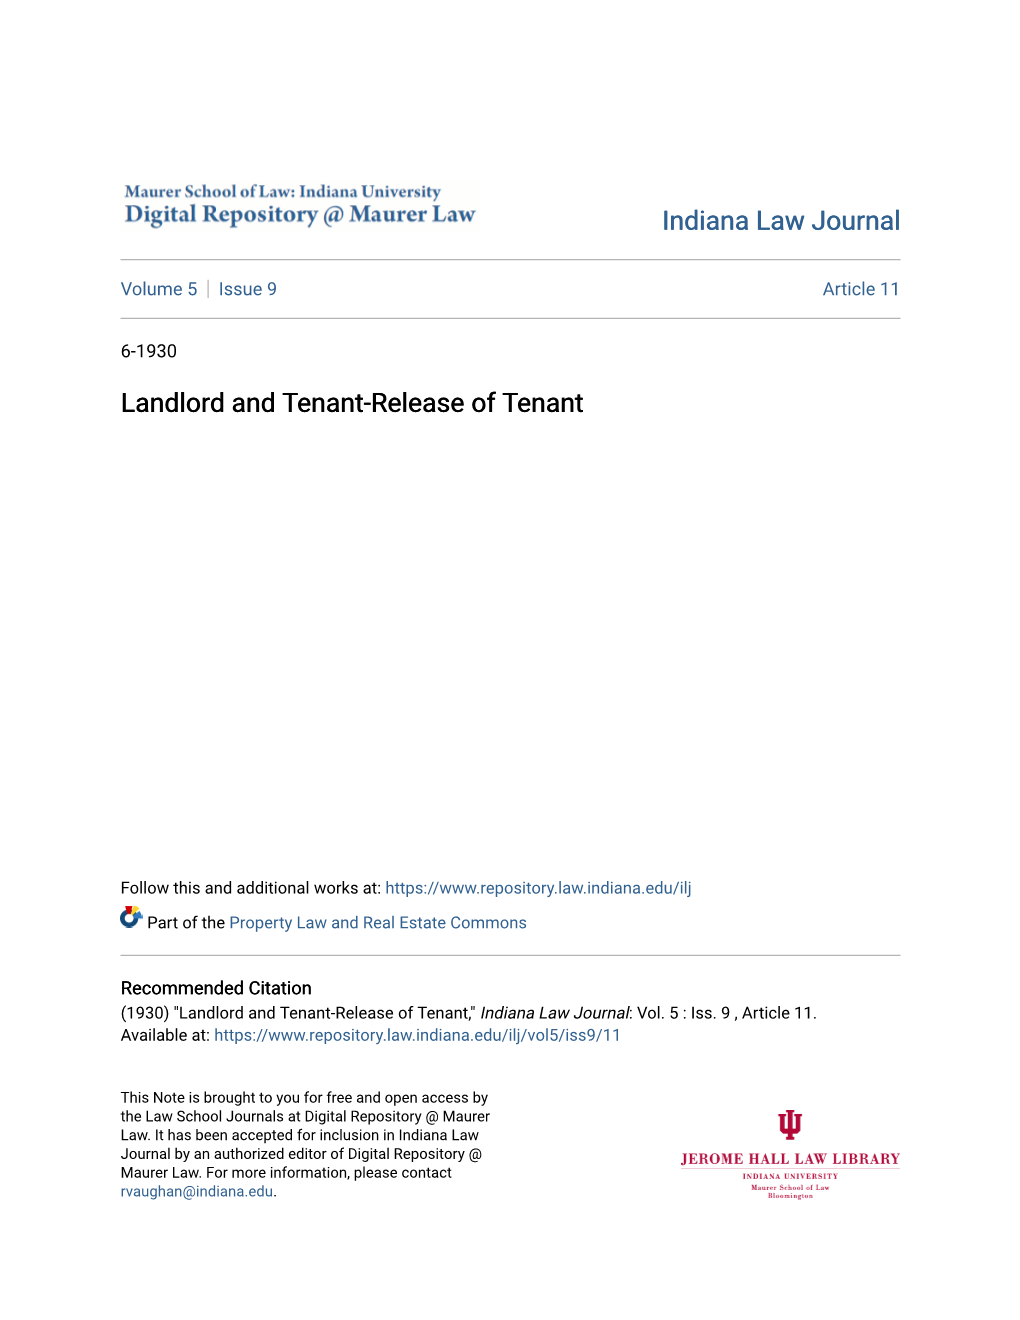 Landlord and Tenant-Release of Tenant